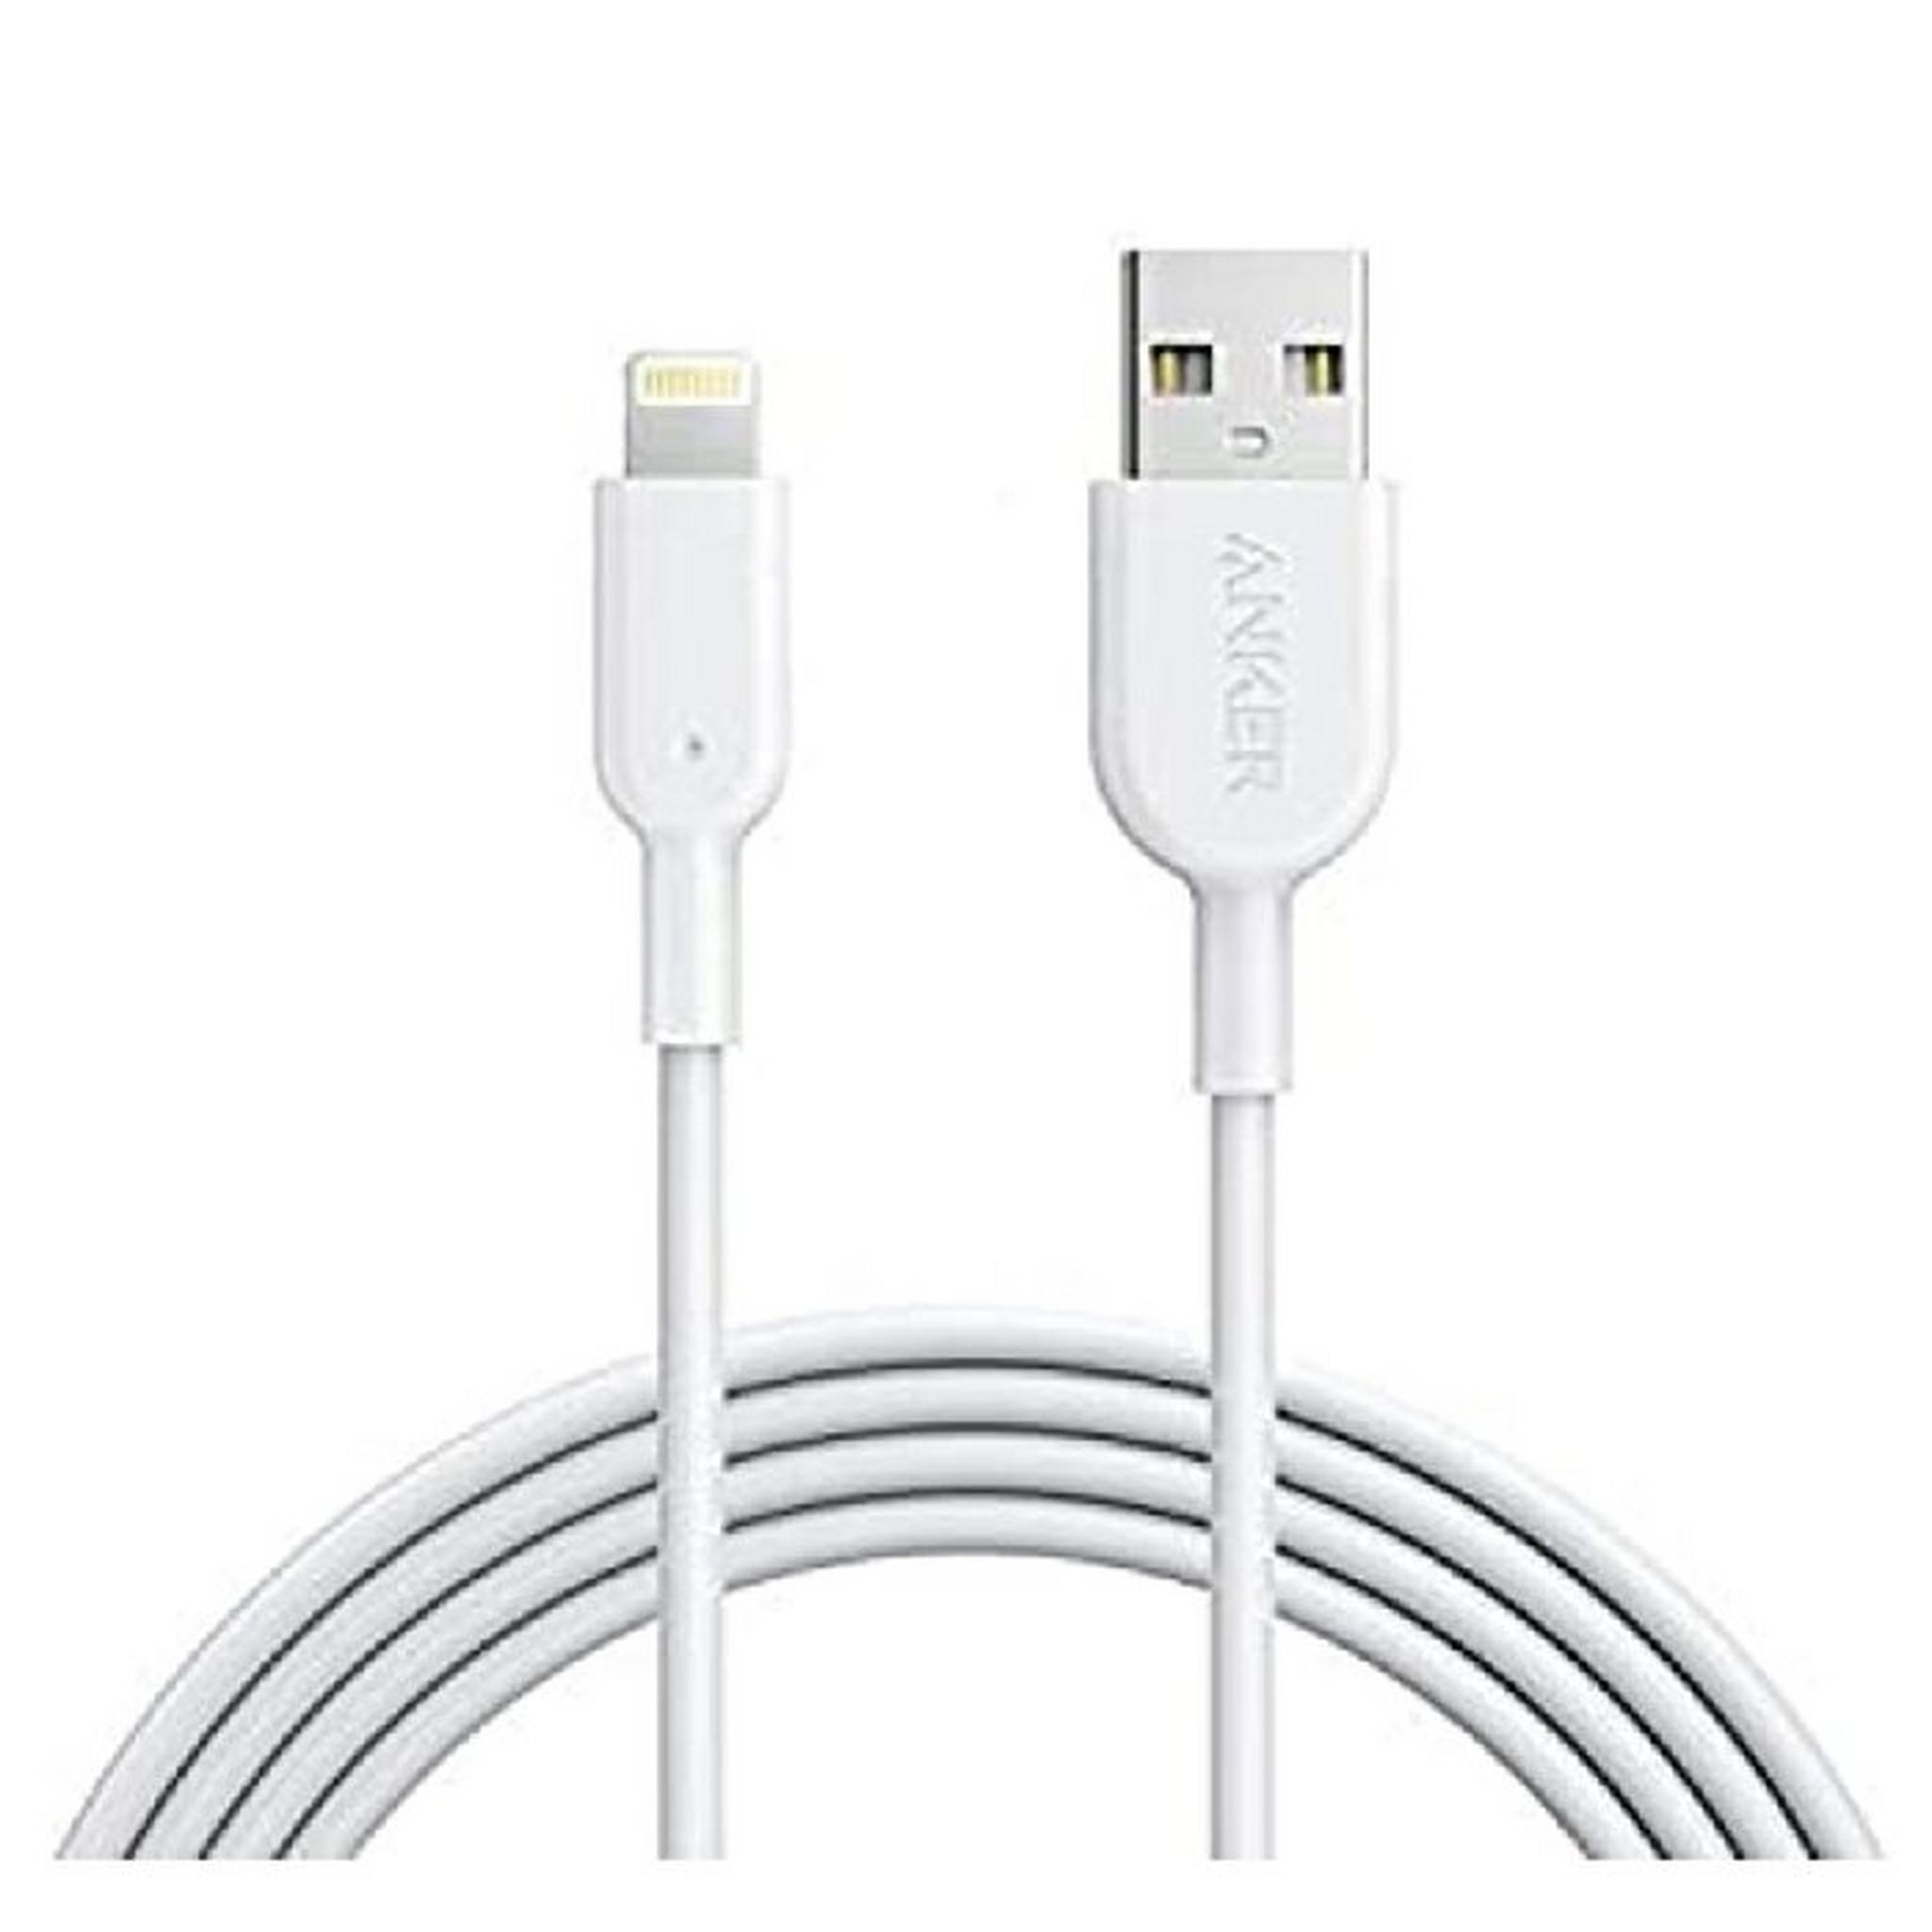 Anker PowerLine Lightning Cable 1.8M (A8433H21) - White